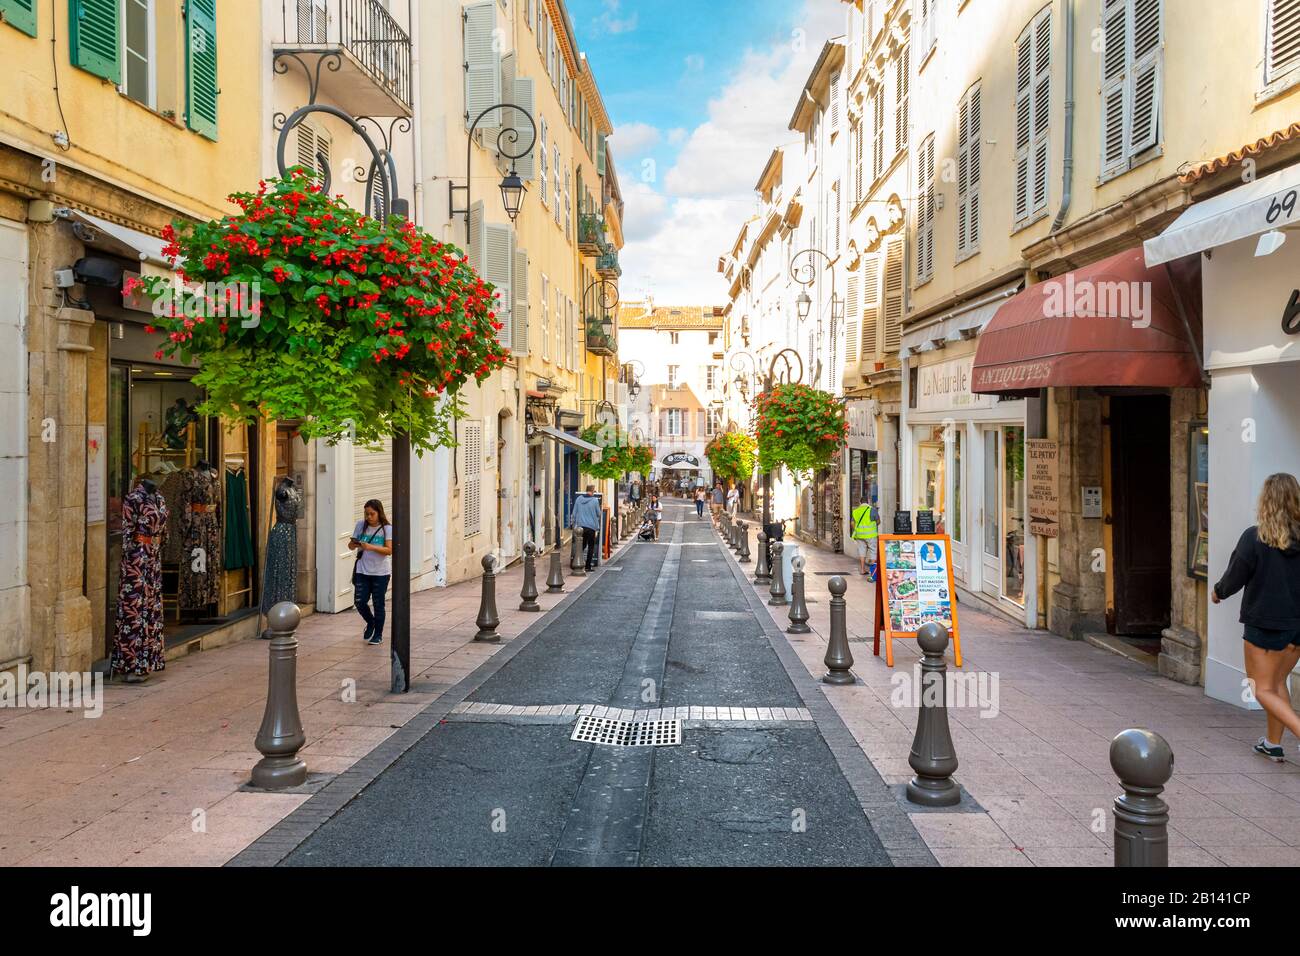 A typical, picturesque street of shops and apartments in Antibes, France, on the south coast and along the Mediterranean Sea. Stock Photo